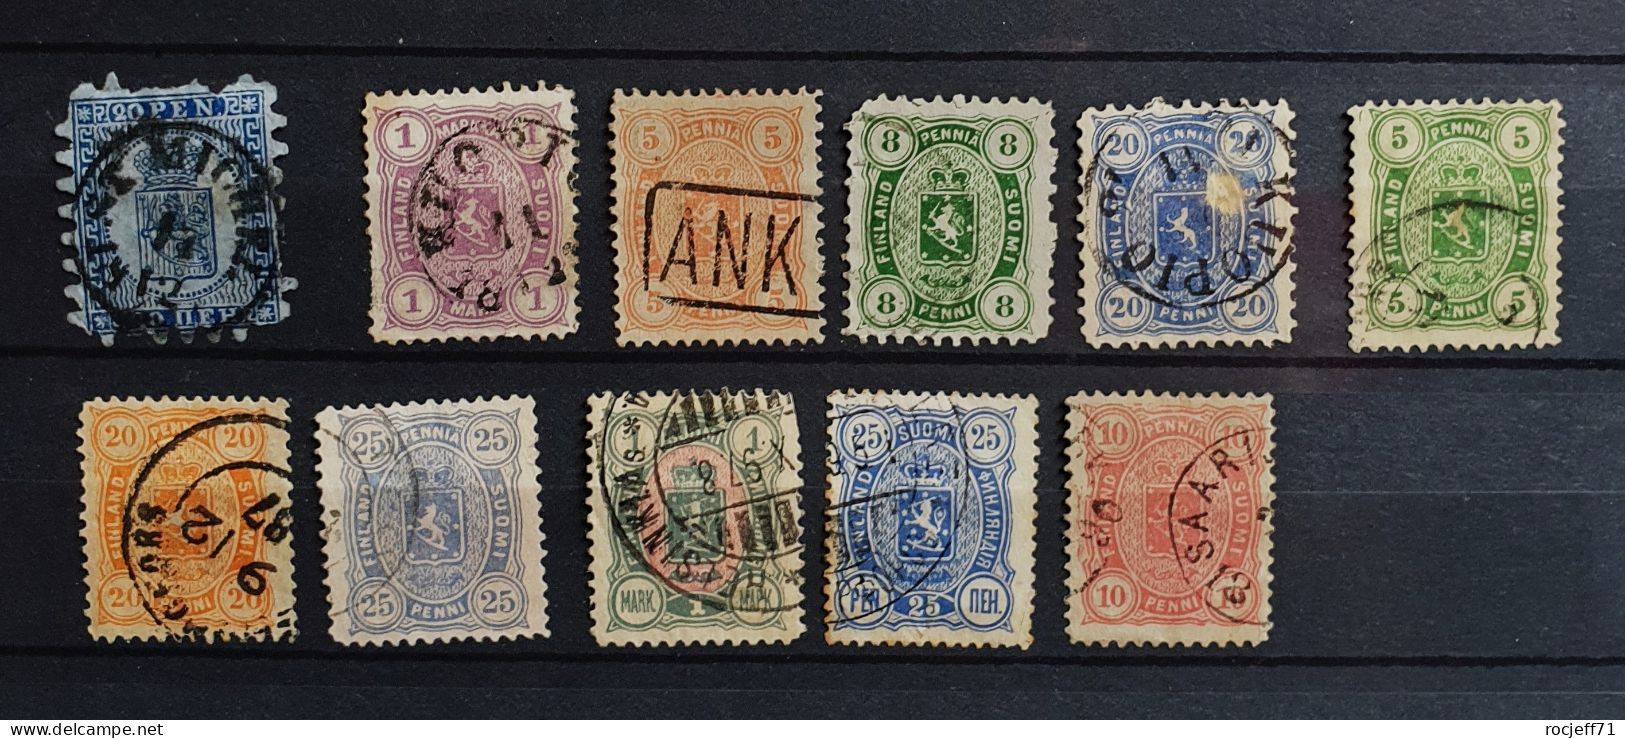 05 - 24 - Gino - Finlande Lot De Vieux Timbres - Old Stamps - - Used Stamps